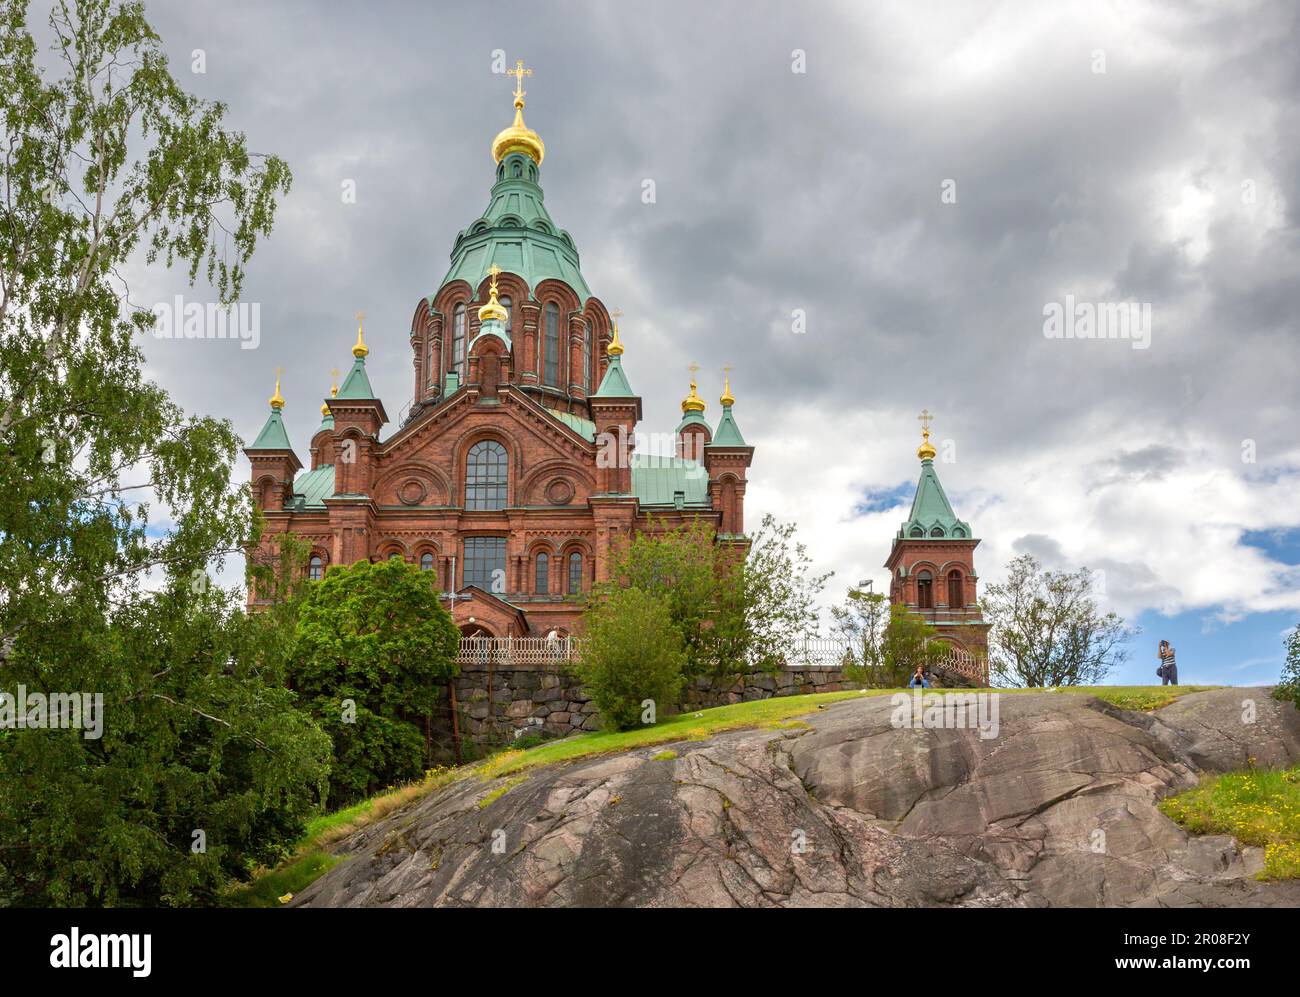 The Orthodox Uspenski Cathedral in Helsinki, Finland was designed by the Russian architect Aleksey Gornostayev (1808–1862).  The cathedral was built a Stock Photo